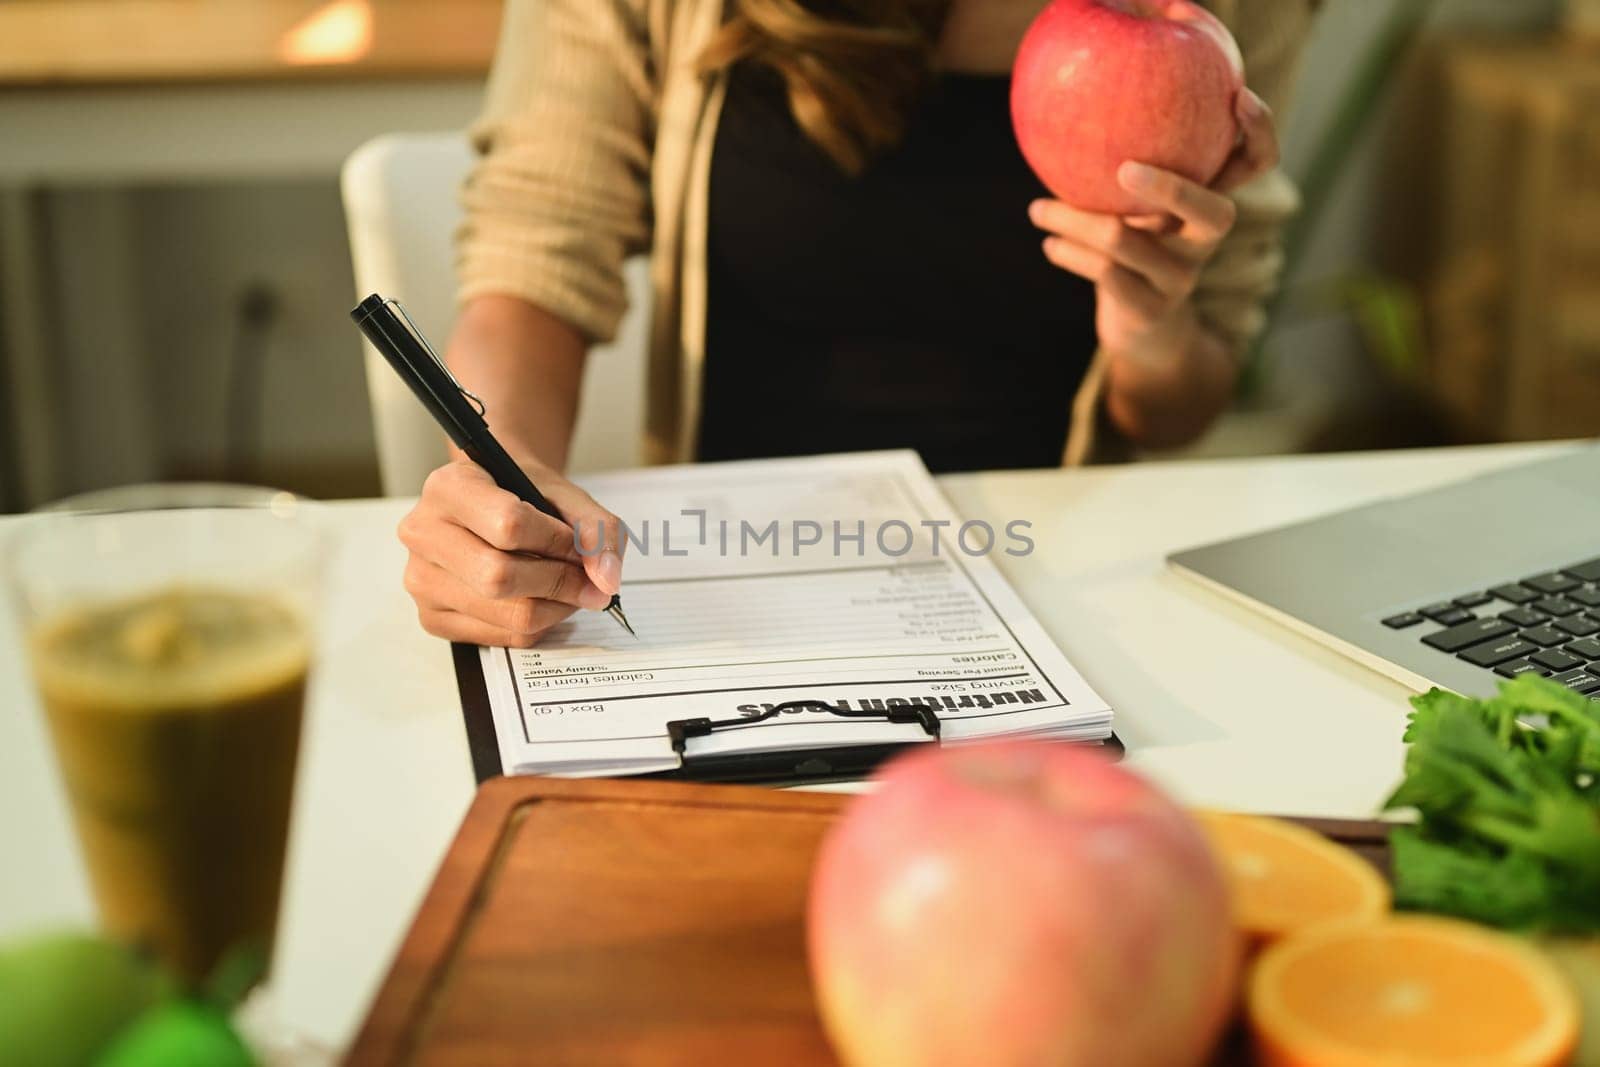 Nutritionist holding an apple and writing recipe at working desk with fresh fruit. Healthcare and diet concept.